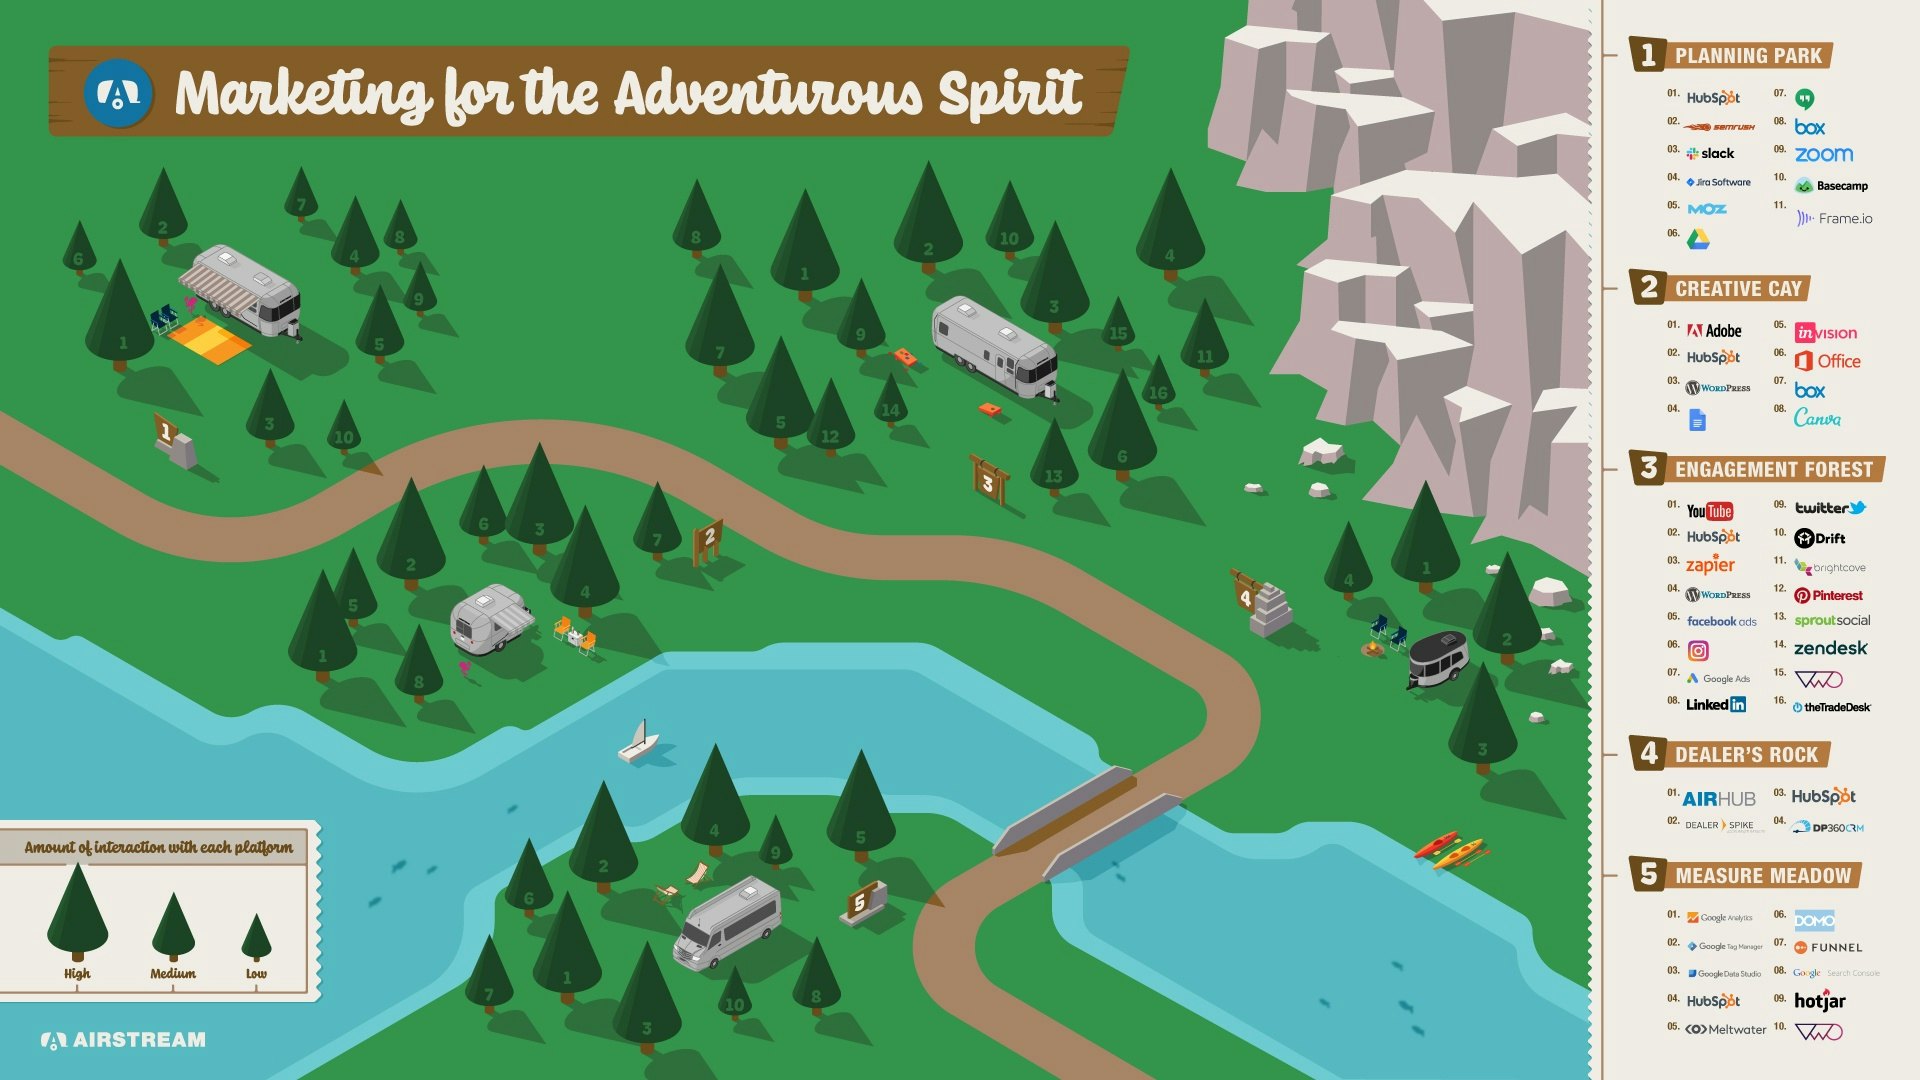 Park Map Illustration with Five Campsites with Airstream Travel Trailers and Marketing Technology